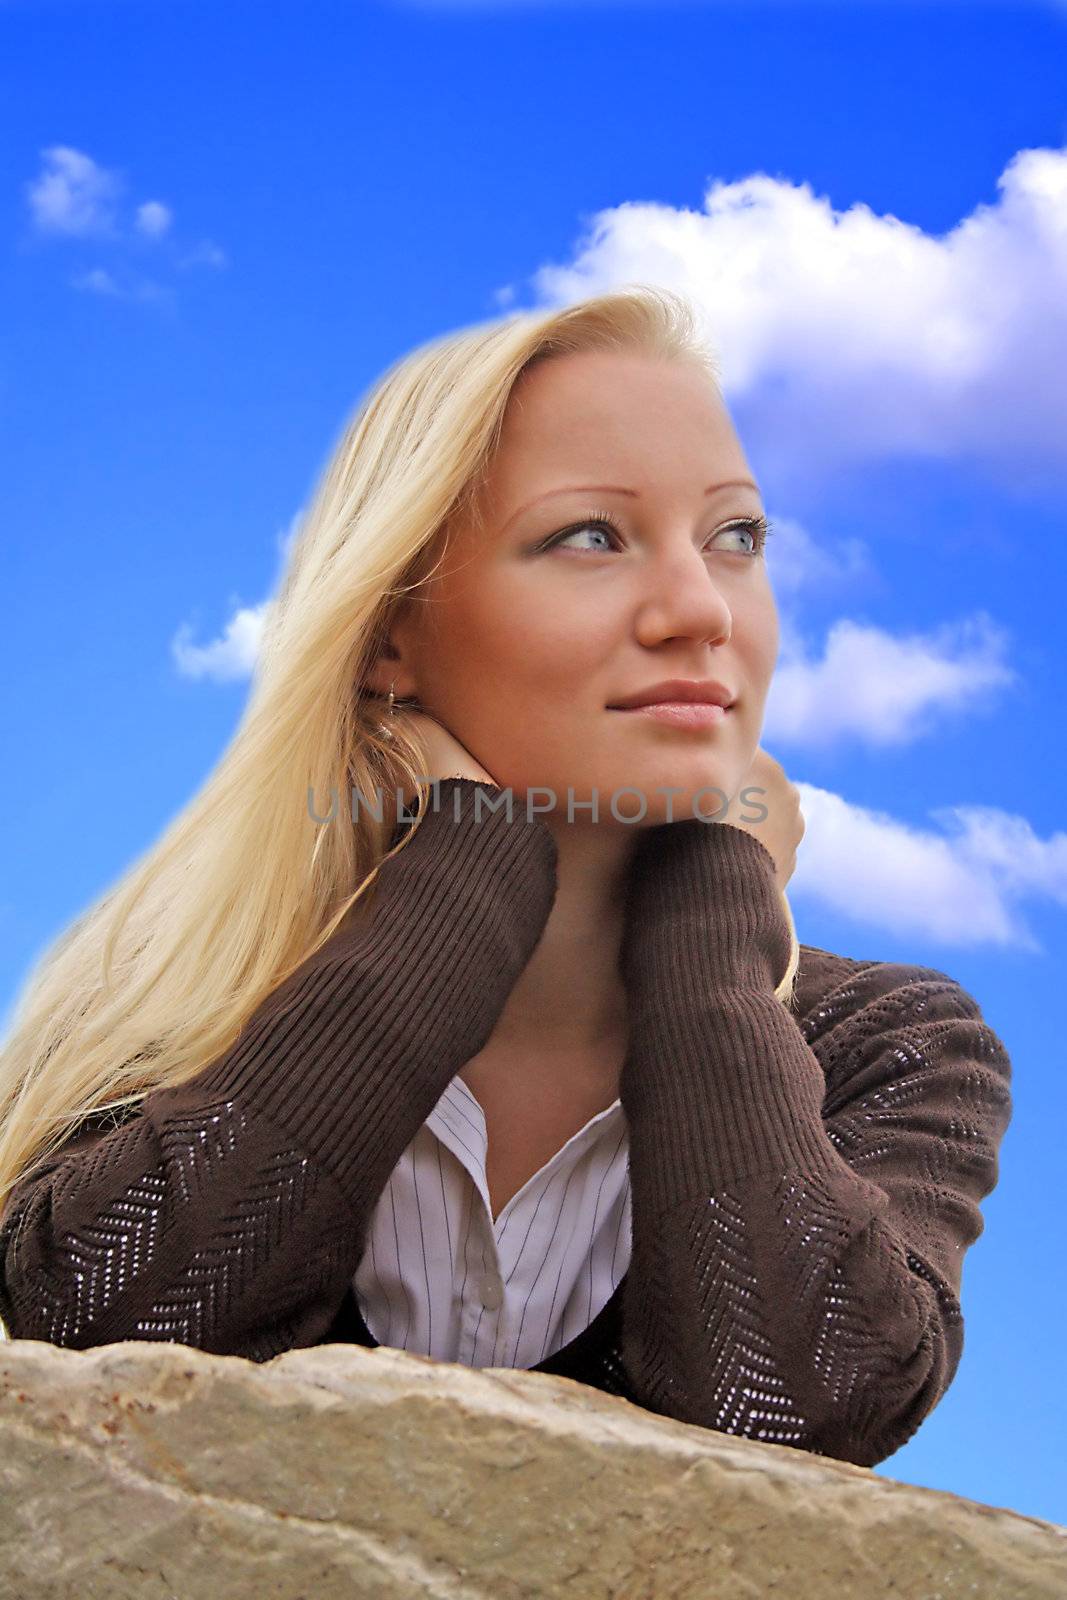 A portrait of a young beautiful blonde woman infront of a bright blue sky.
** Note: Slight blurriness, best at smaller sizes.